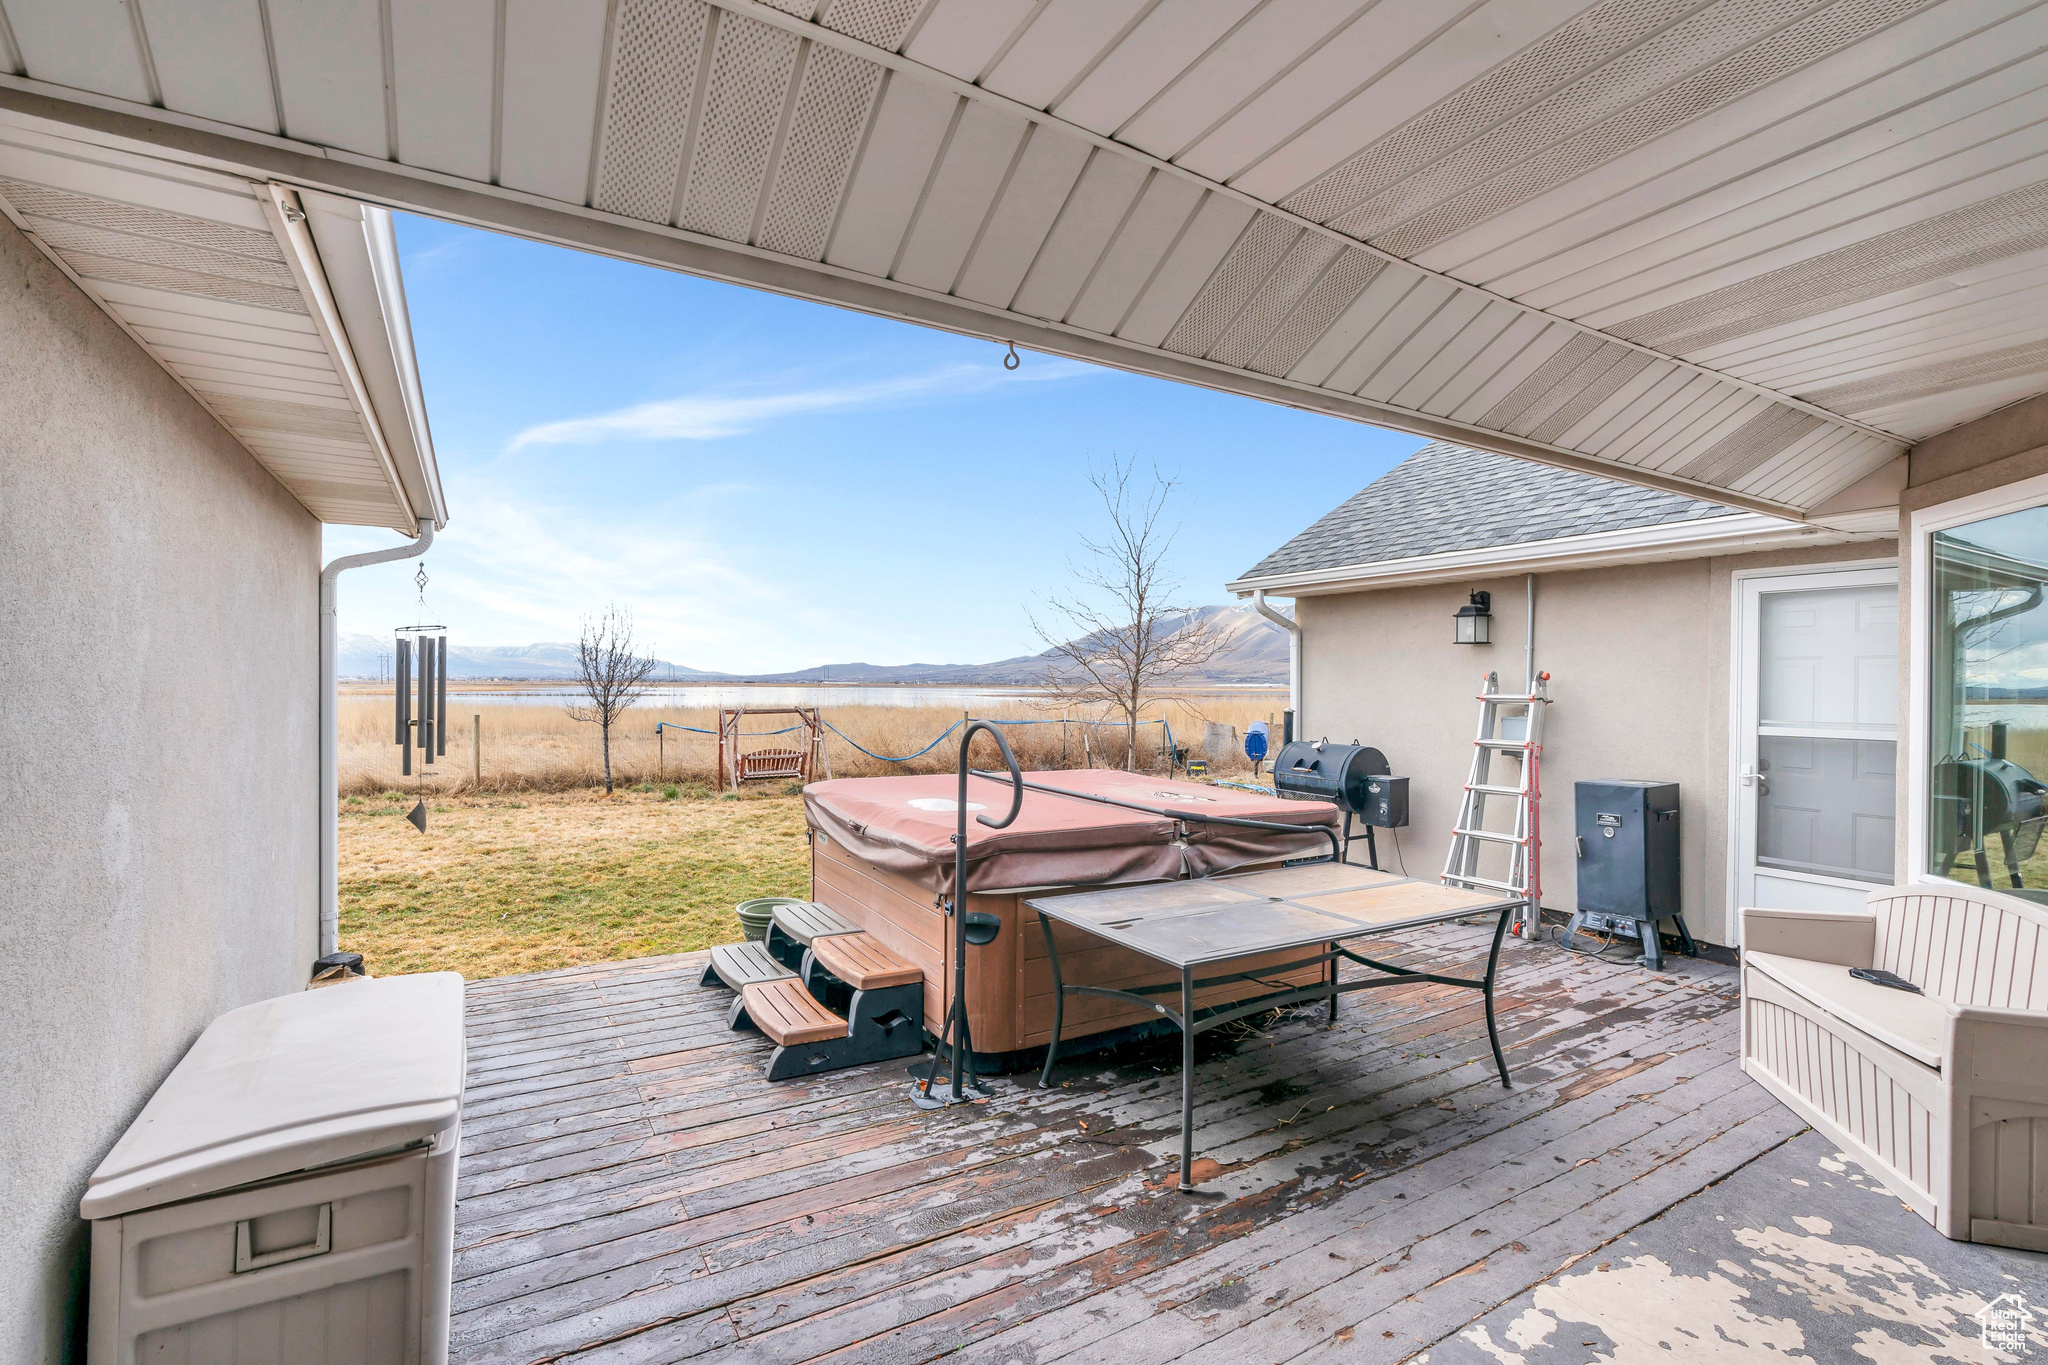 Large Deck with a fantastic view and a HOT TUB!